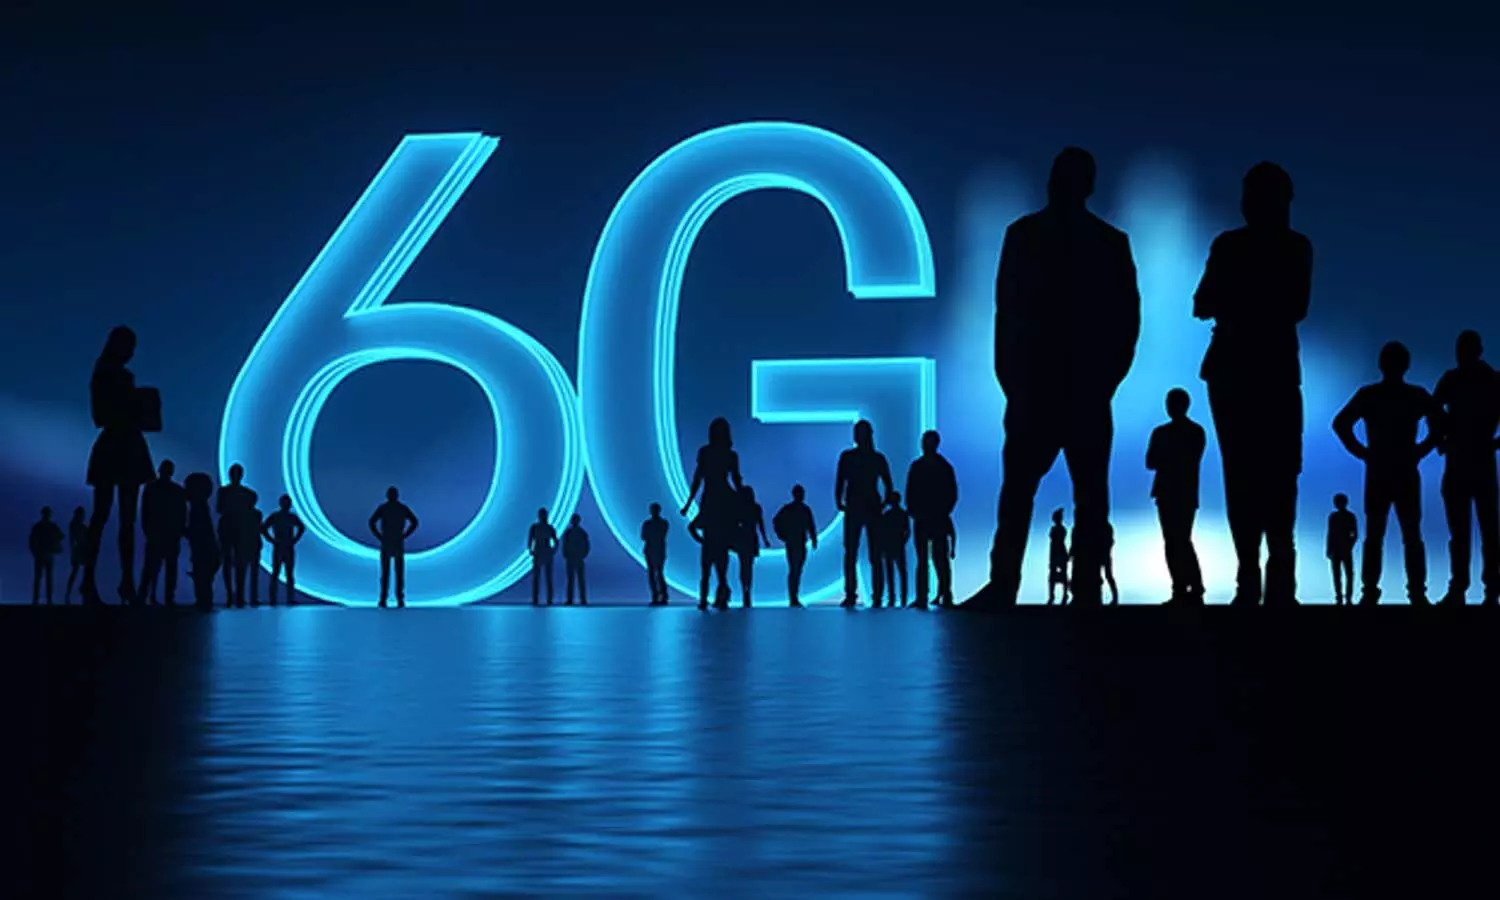 6-G Mobile Technology: China has developed 6-G mobile technology